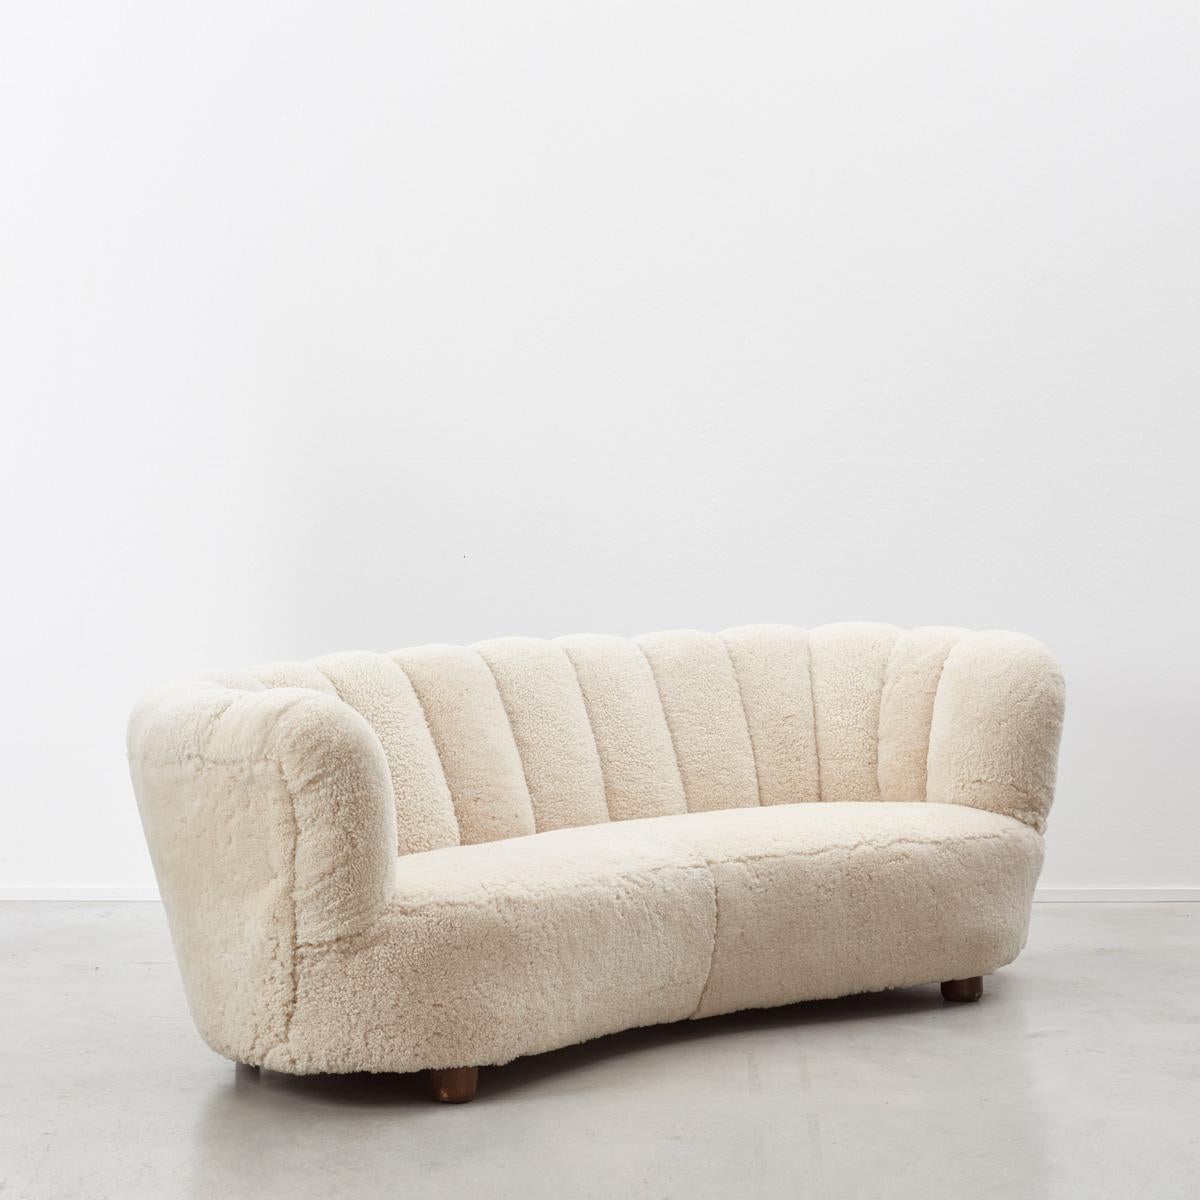 Early 1940s Danish Banana three-seat sofa in the manner of architect Flemming Lassen, newly reupholstered in genuine sheeps pelts. The sofa is of excellent craftsmanship, probably made by Slagelse Møbelværk, Denmark using proper materials – solid